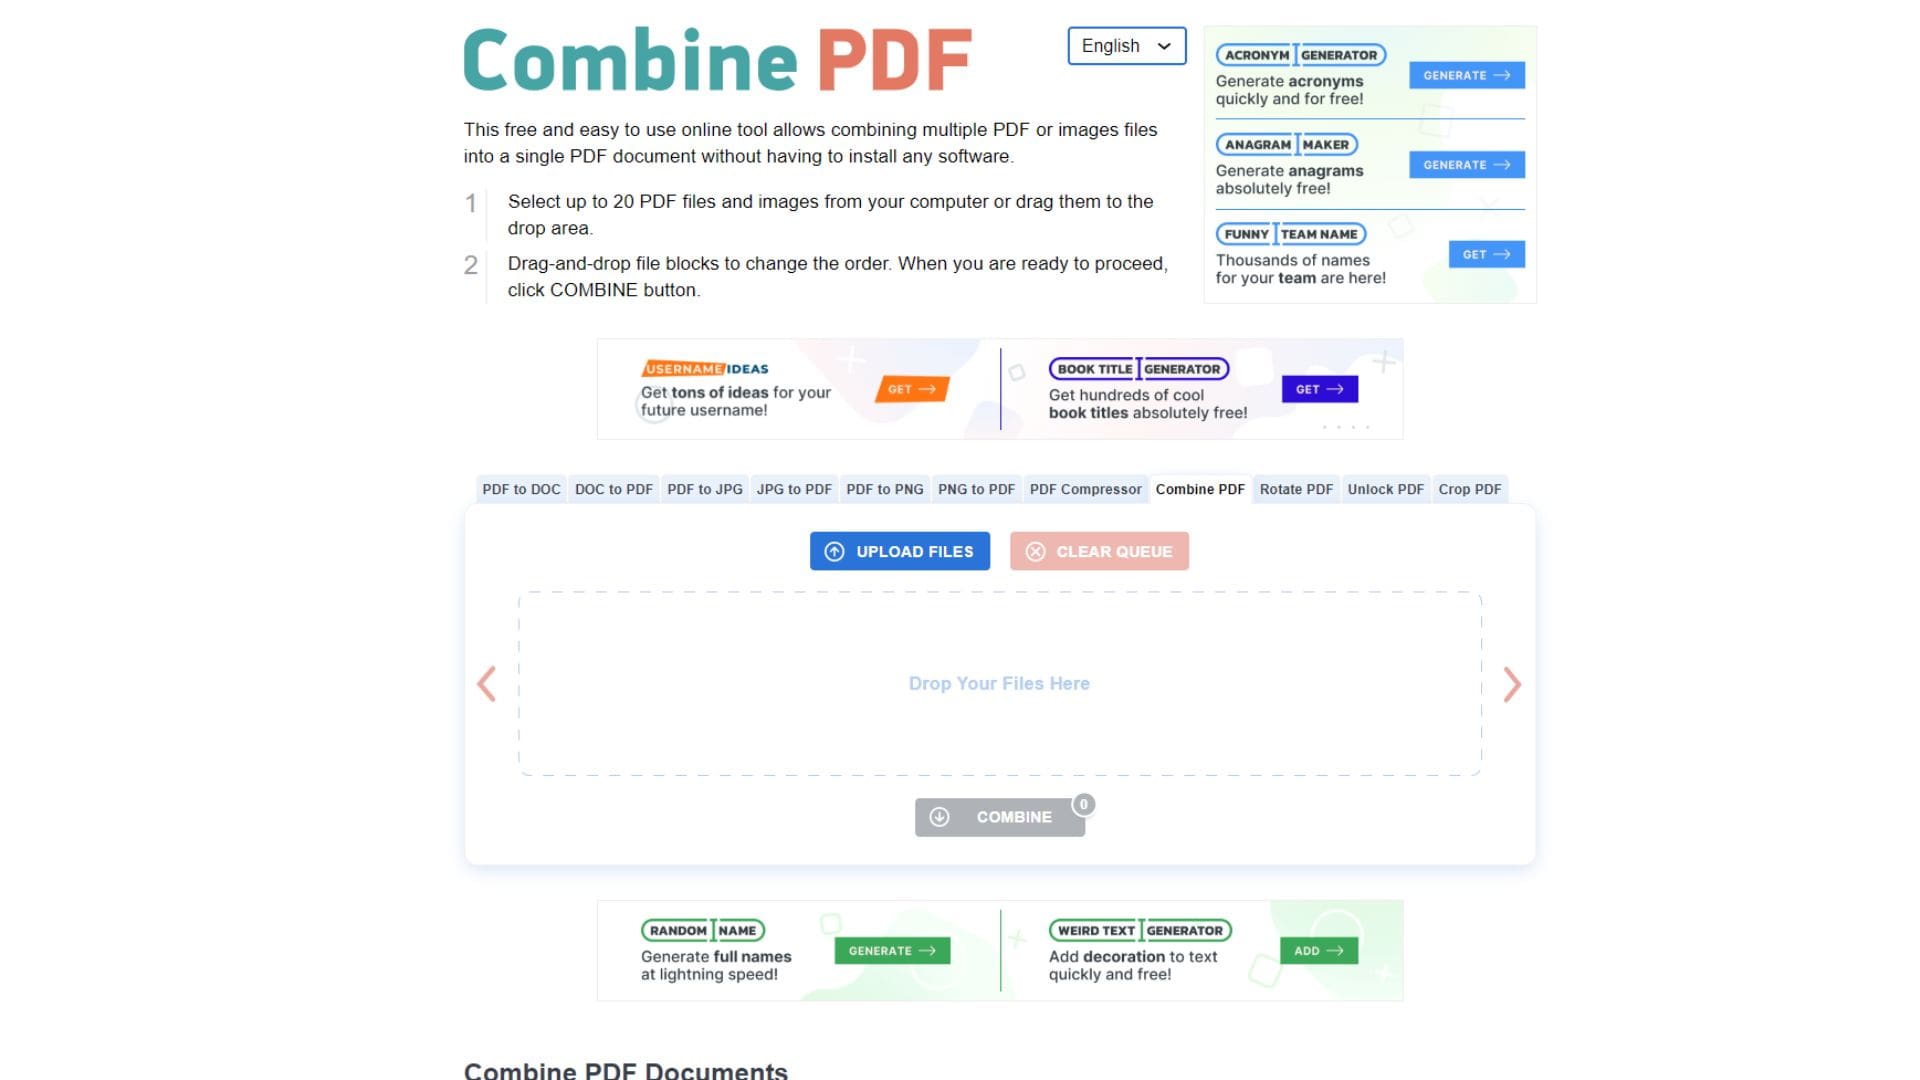 How to Merge PDF Files into One